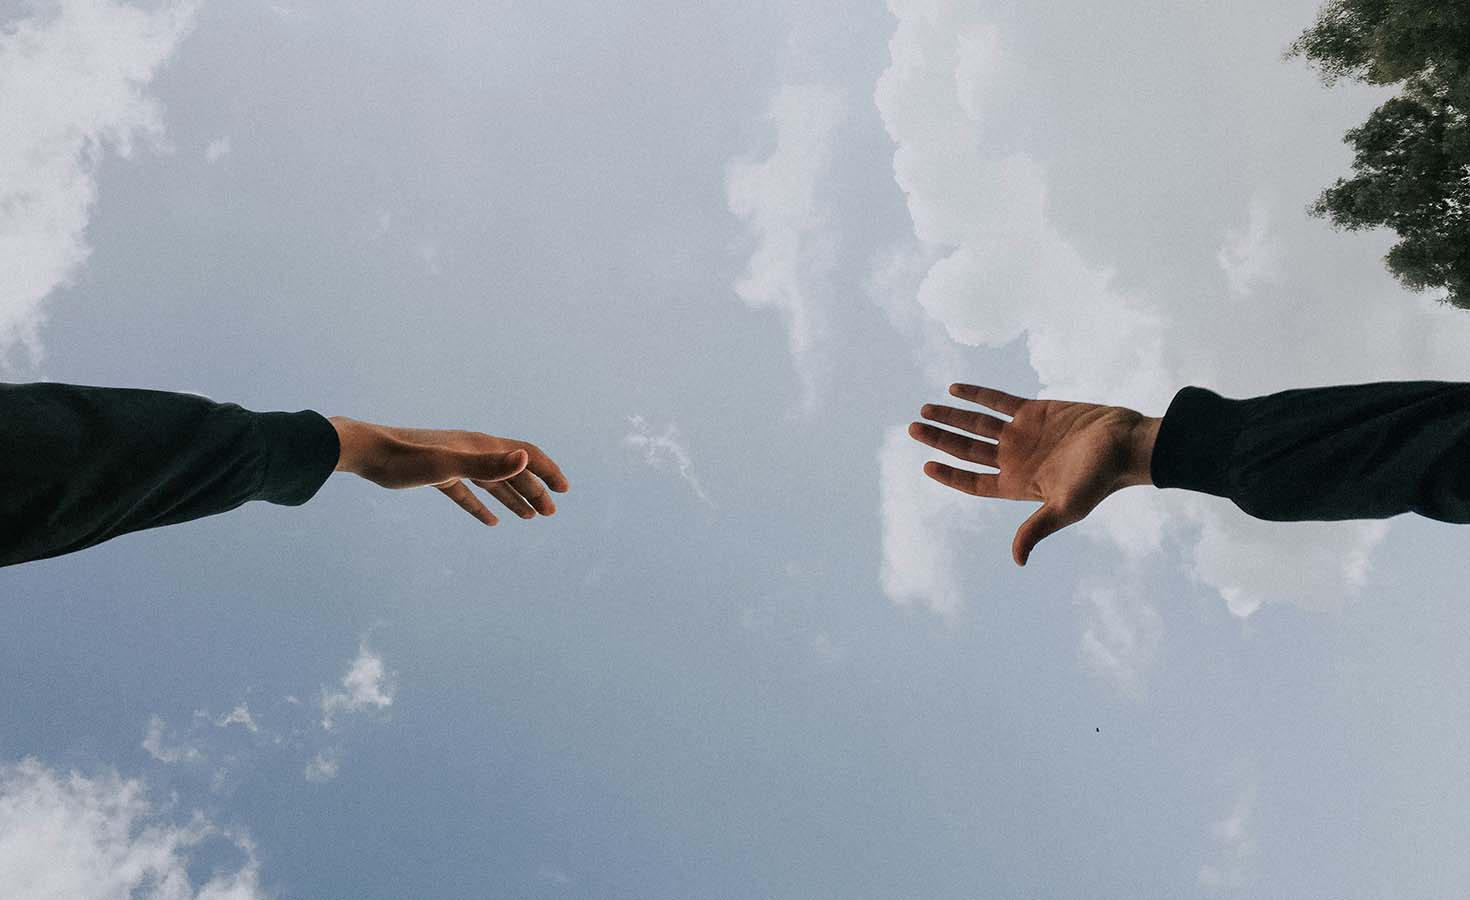 Two hands reaching towards each other